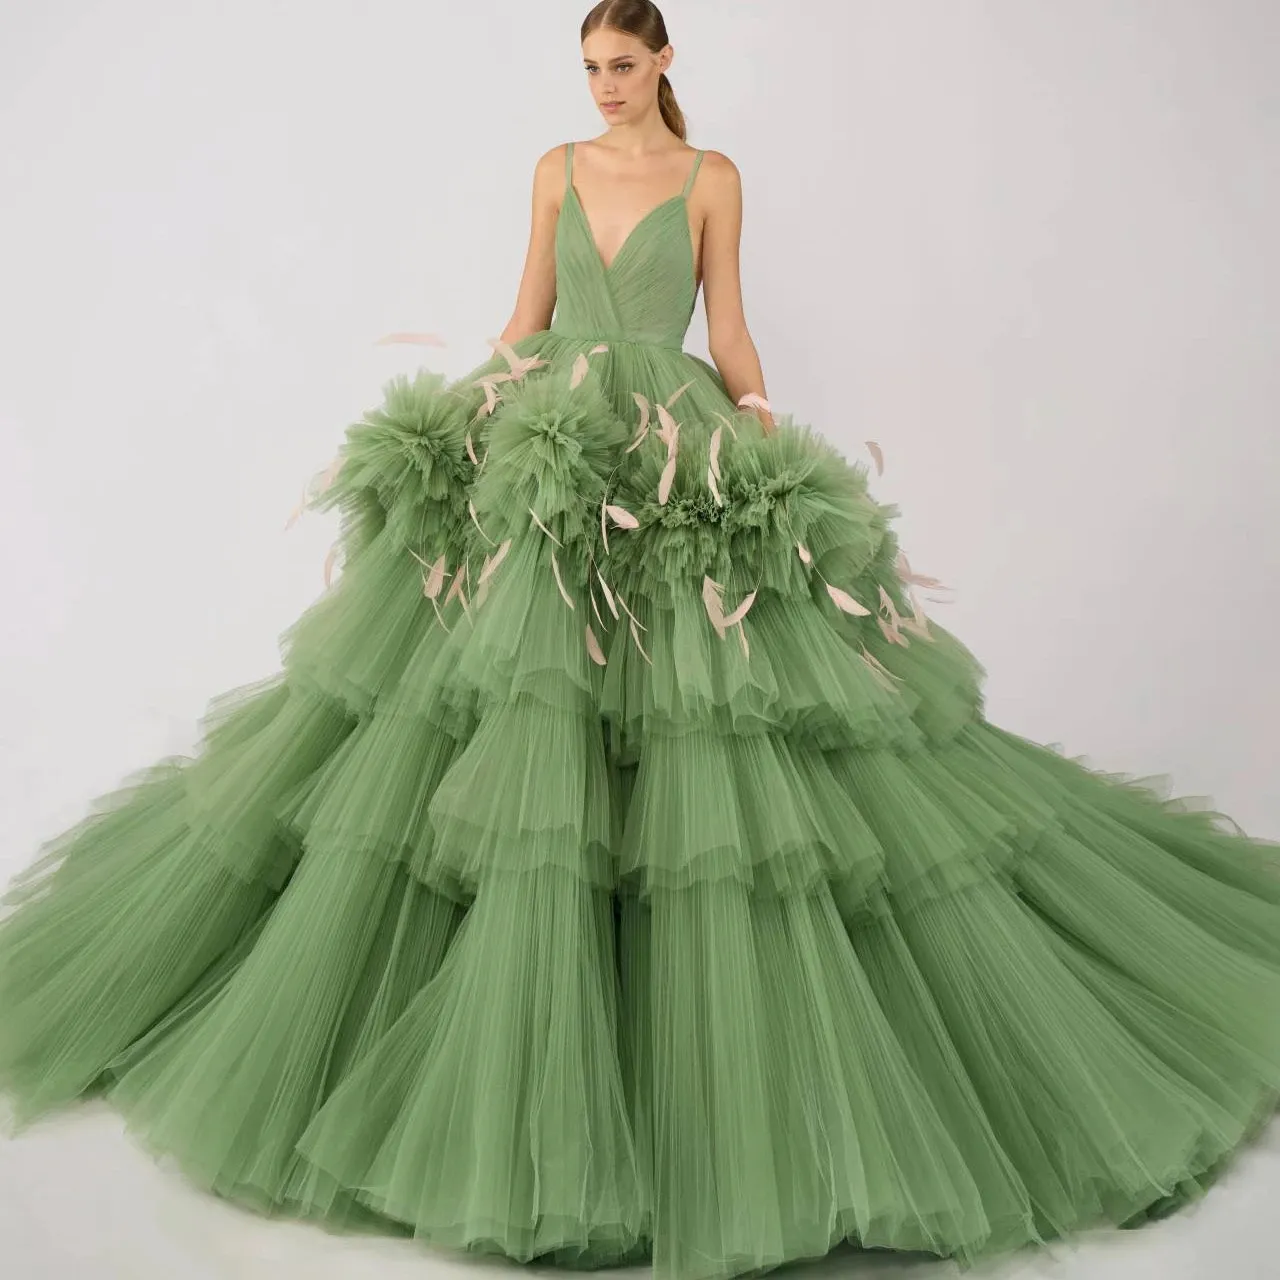 Charming Grass Green Puffy Tulle Prom Gowns Ruffles Tiered Tulle Ball Gowns Feather Long Women Maxi Dresses To Party Custom Made